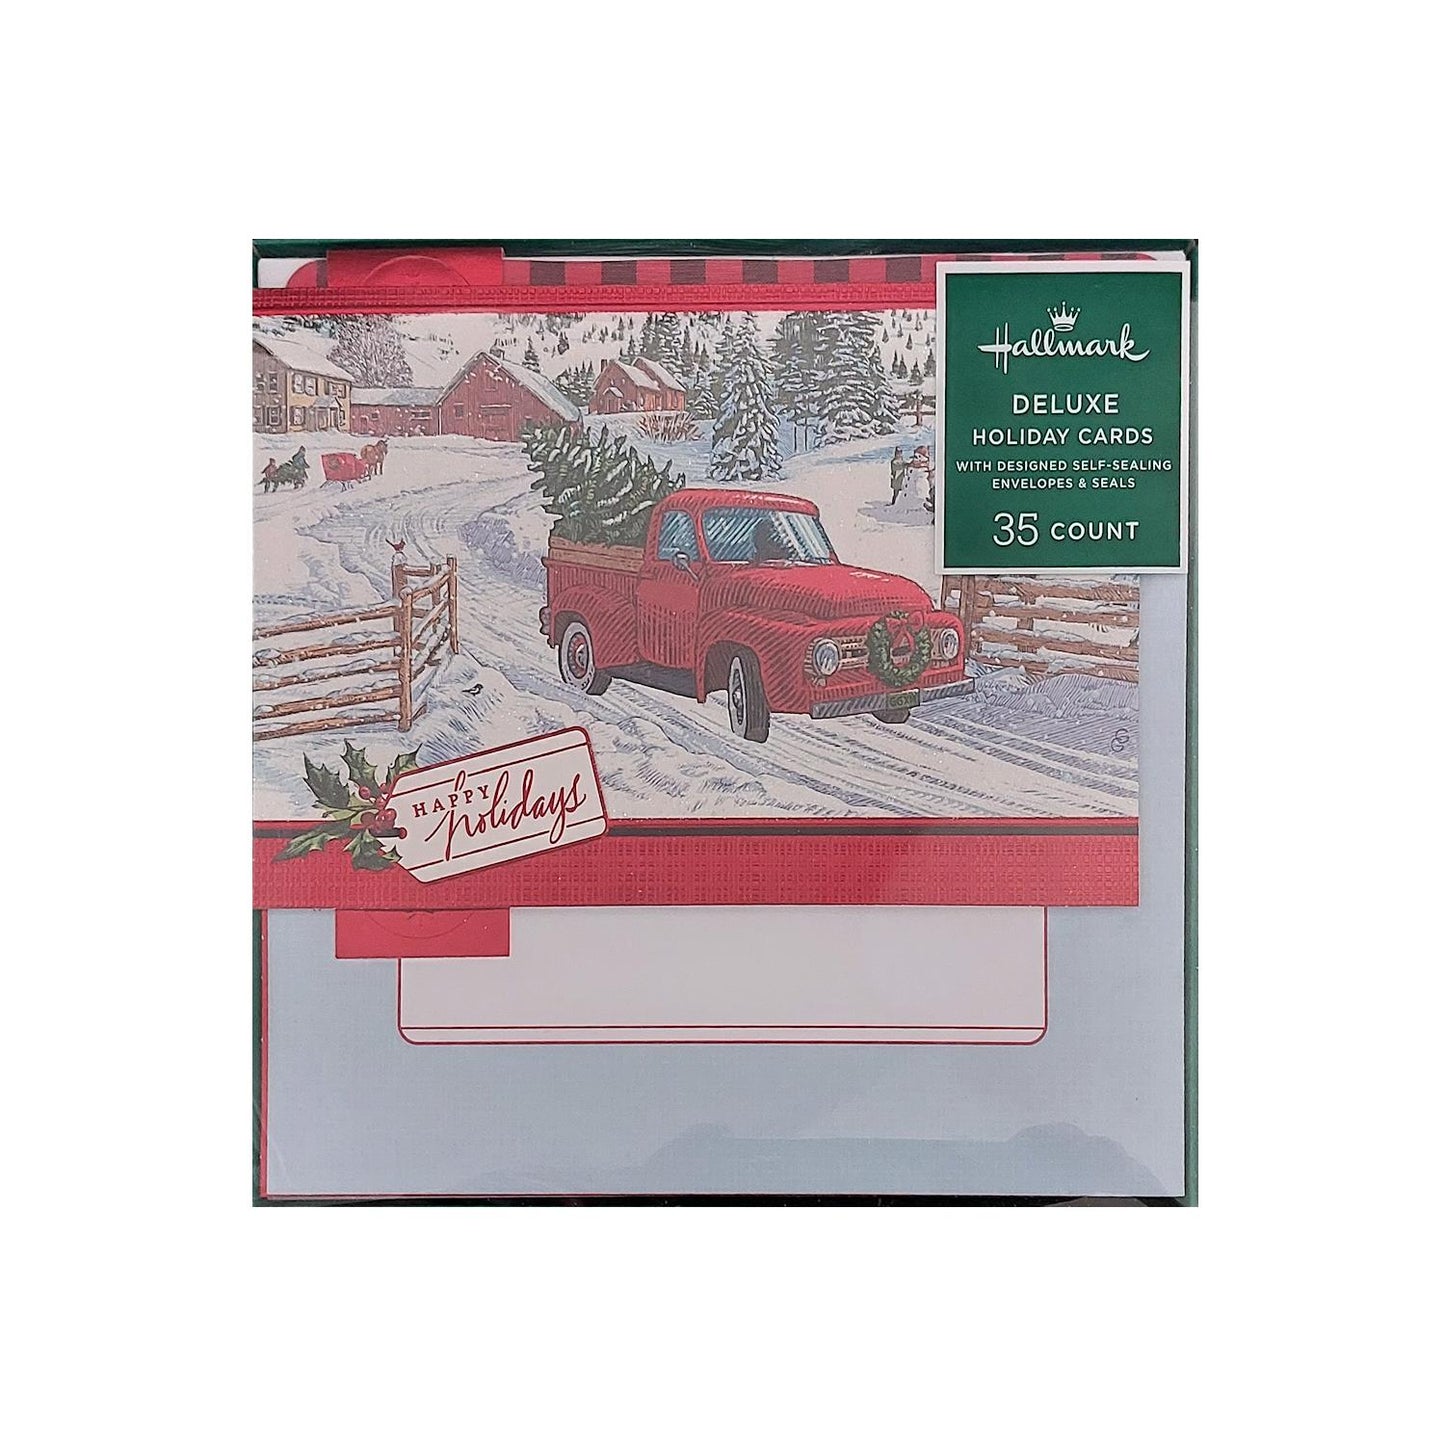 Hallmark Boxed Deluxe Christmas Cards Happy Holidays 35 Cards, Designed Self-Sealing Envelopes and Seals